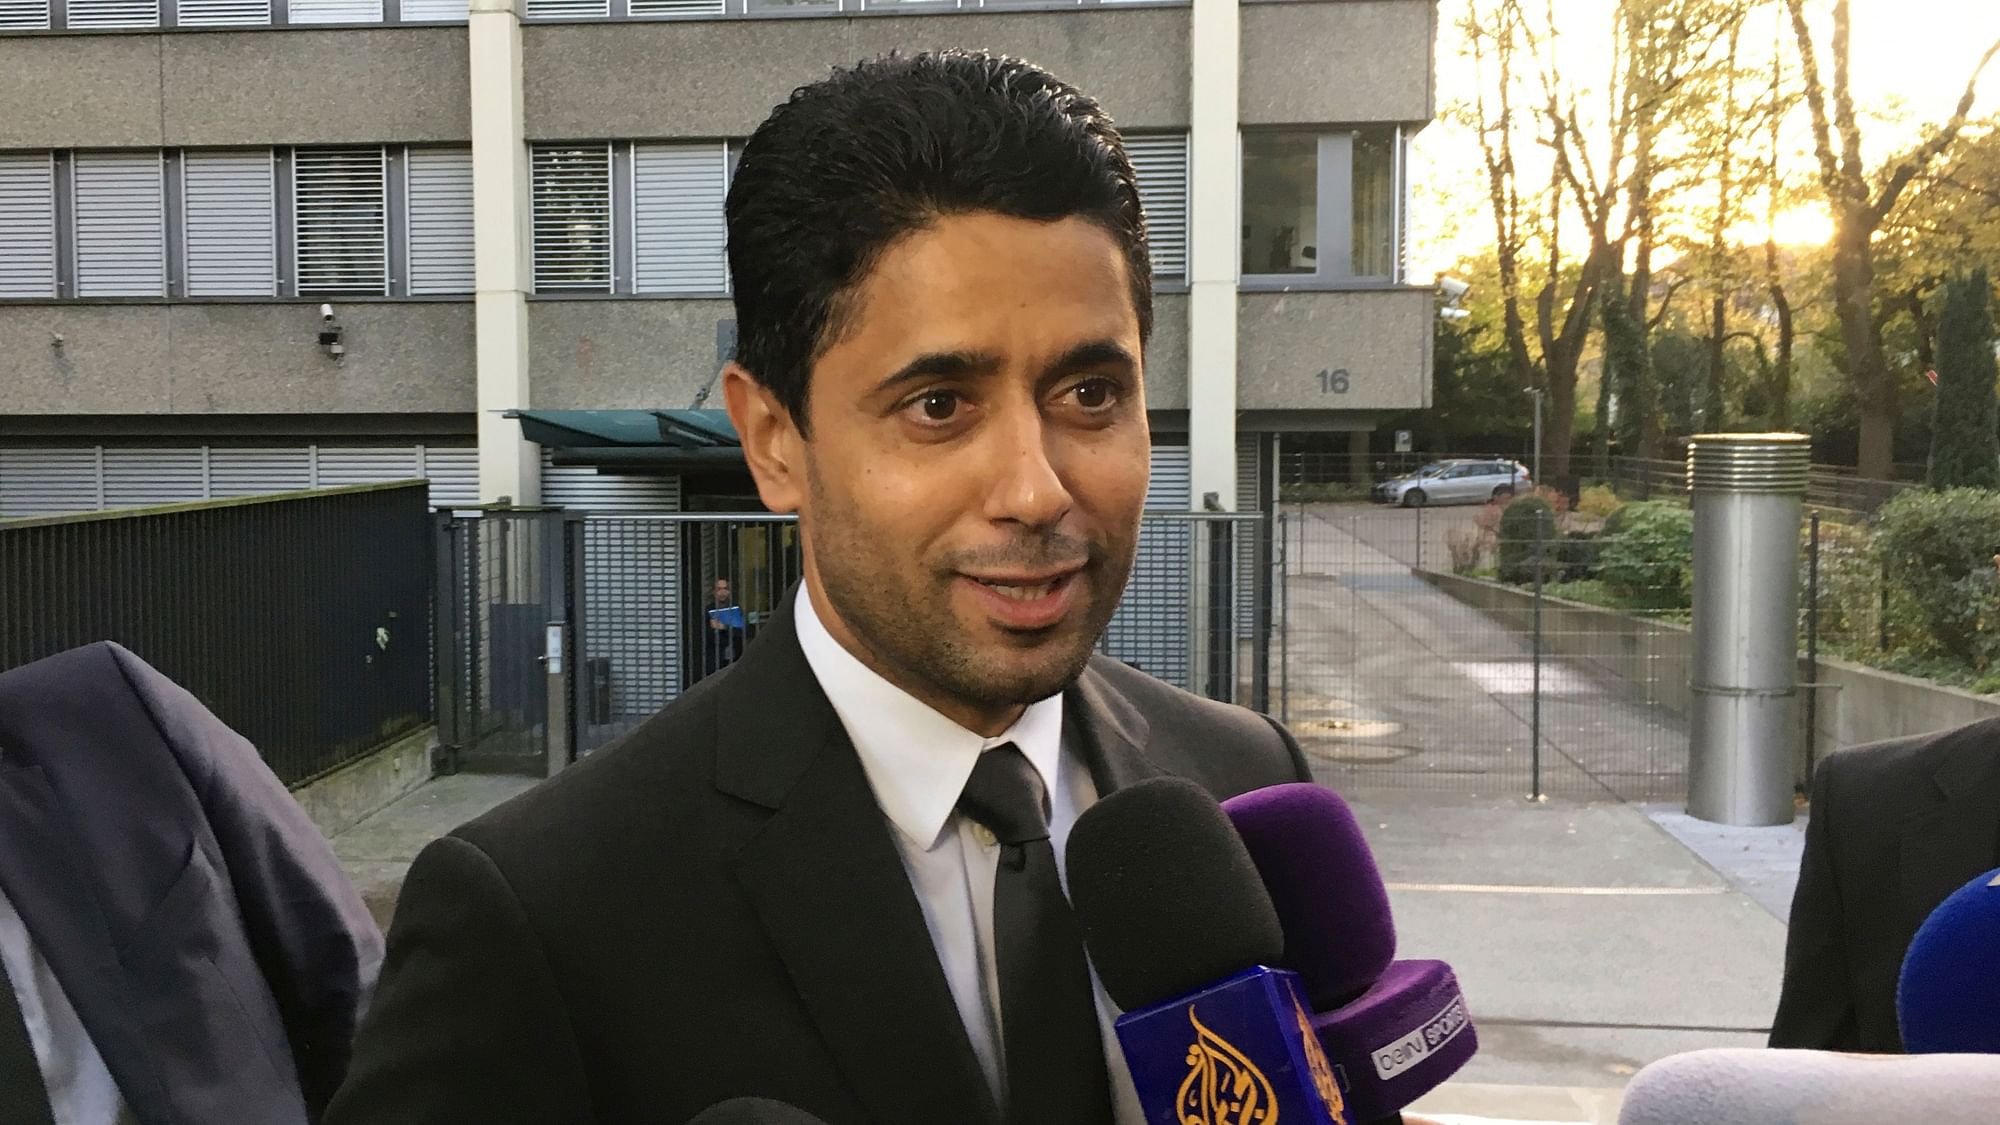 In this Wednesday Oct. 25, 2017 file photo, Paris Saint-Germain president Nasser Al-Khelaifi speaks to the media after a meeting with Swiss prosecutors in Bern, Switzerland.